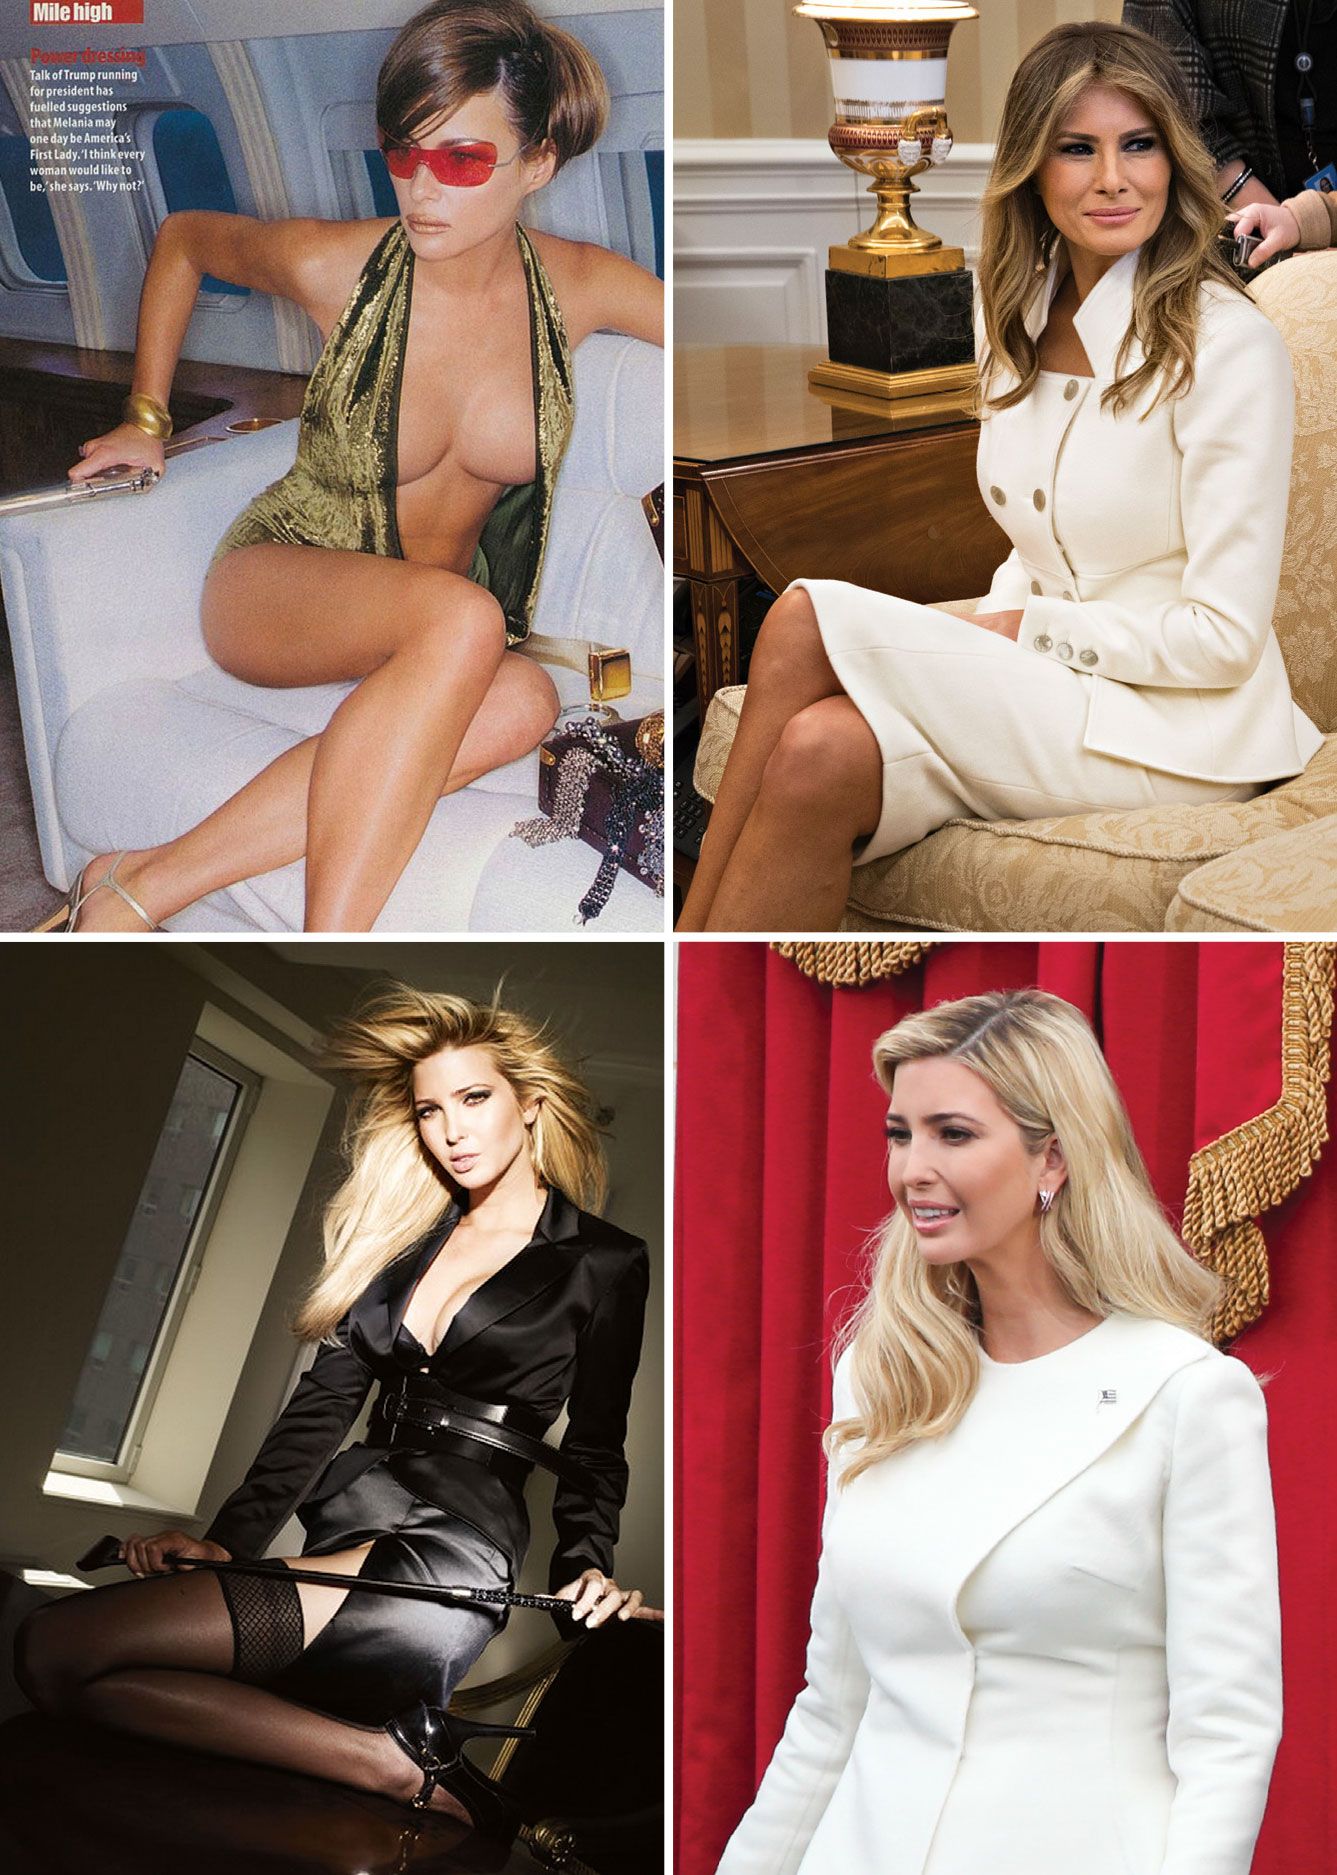 byron gauthier share ivanka trump playboy pictures photos